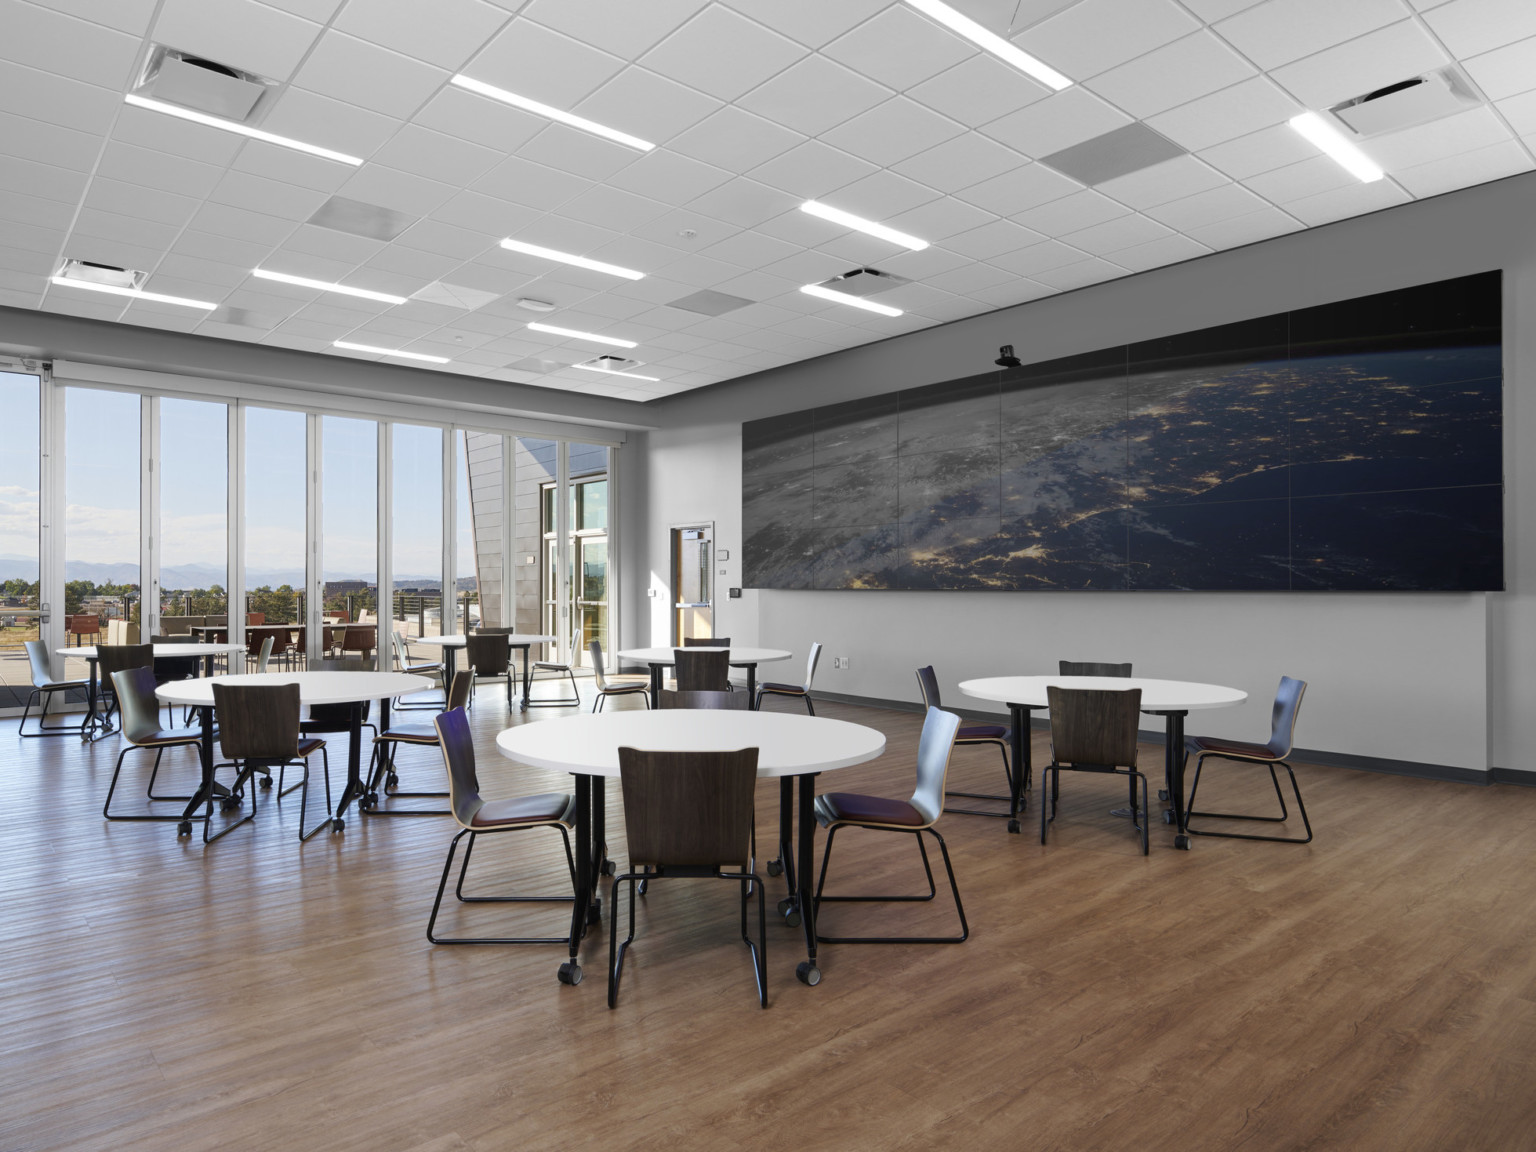 Round tables with black chairs in grey room with floor to ceiling windows. Long screen on right wall, white panel ceiling